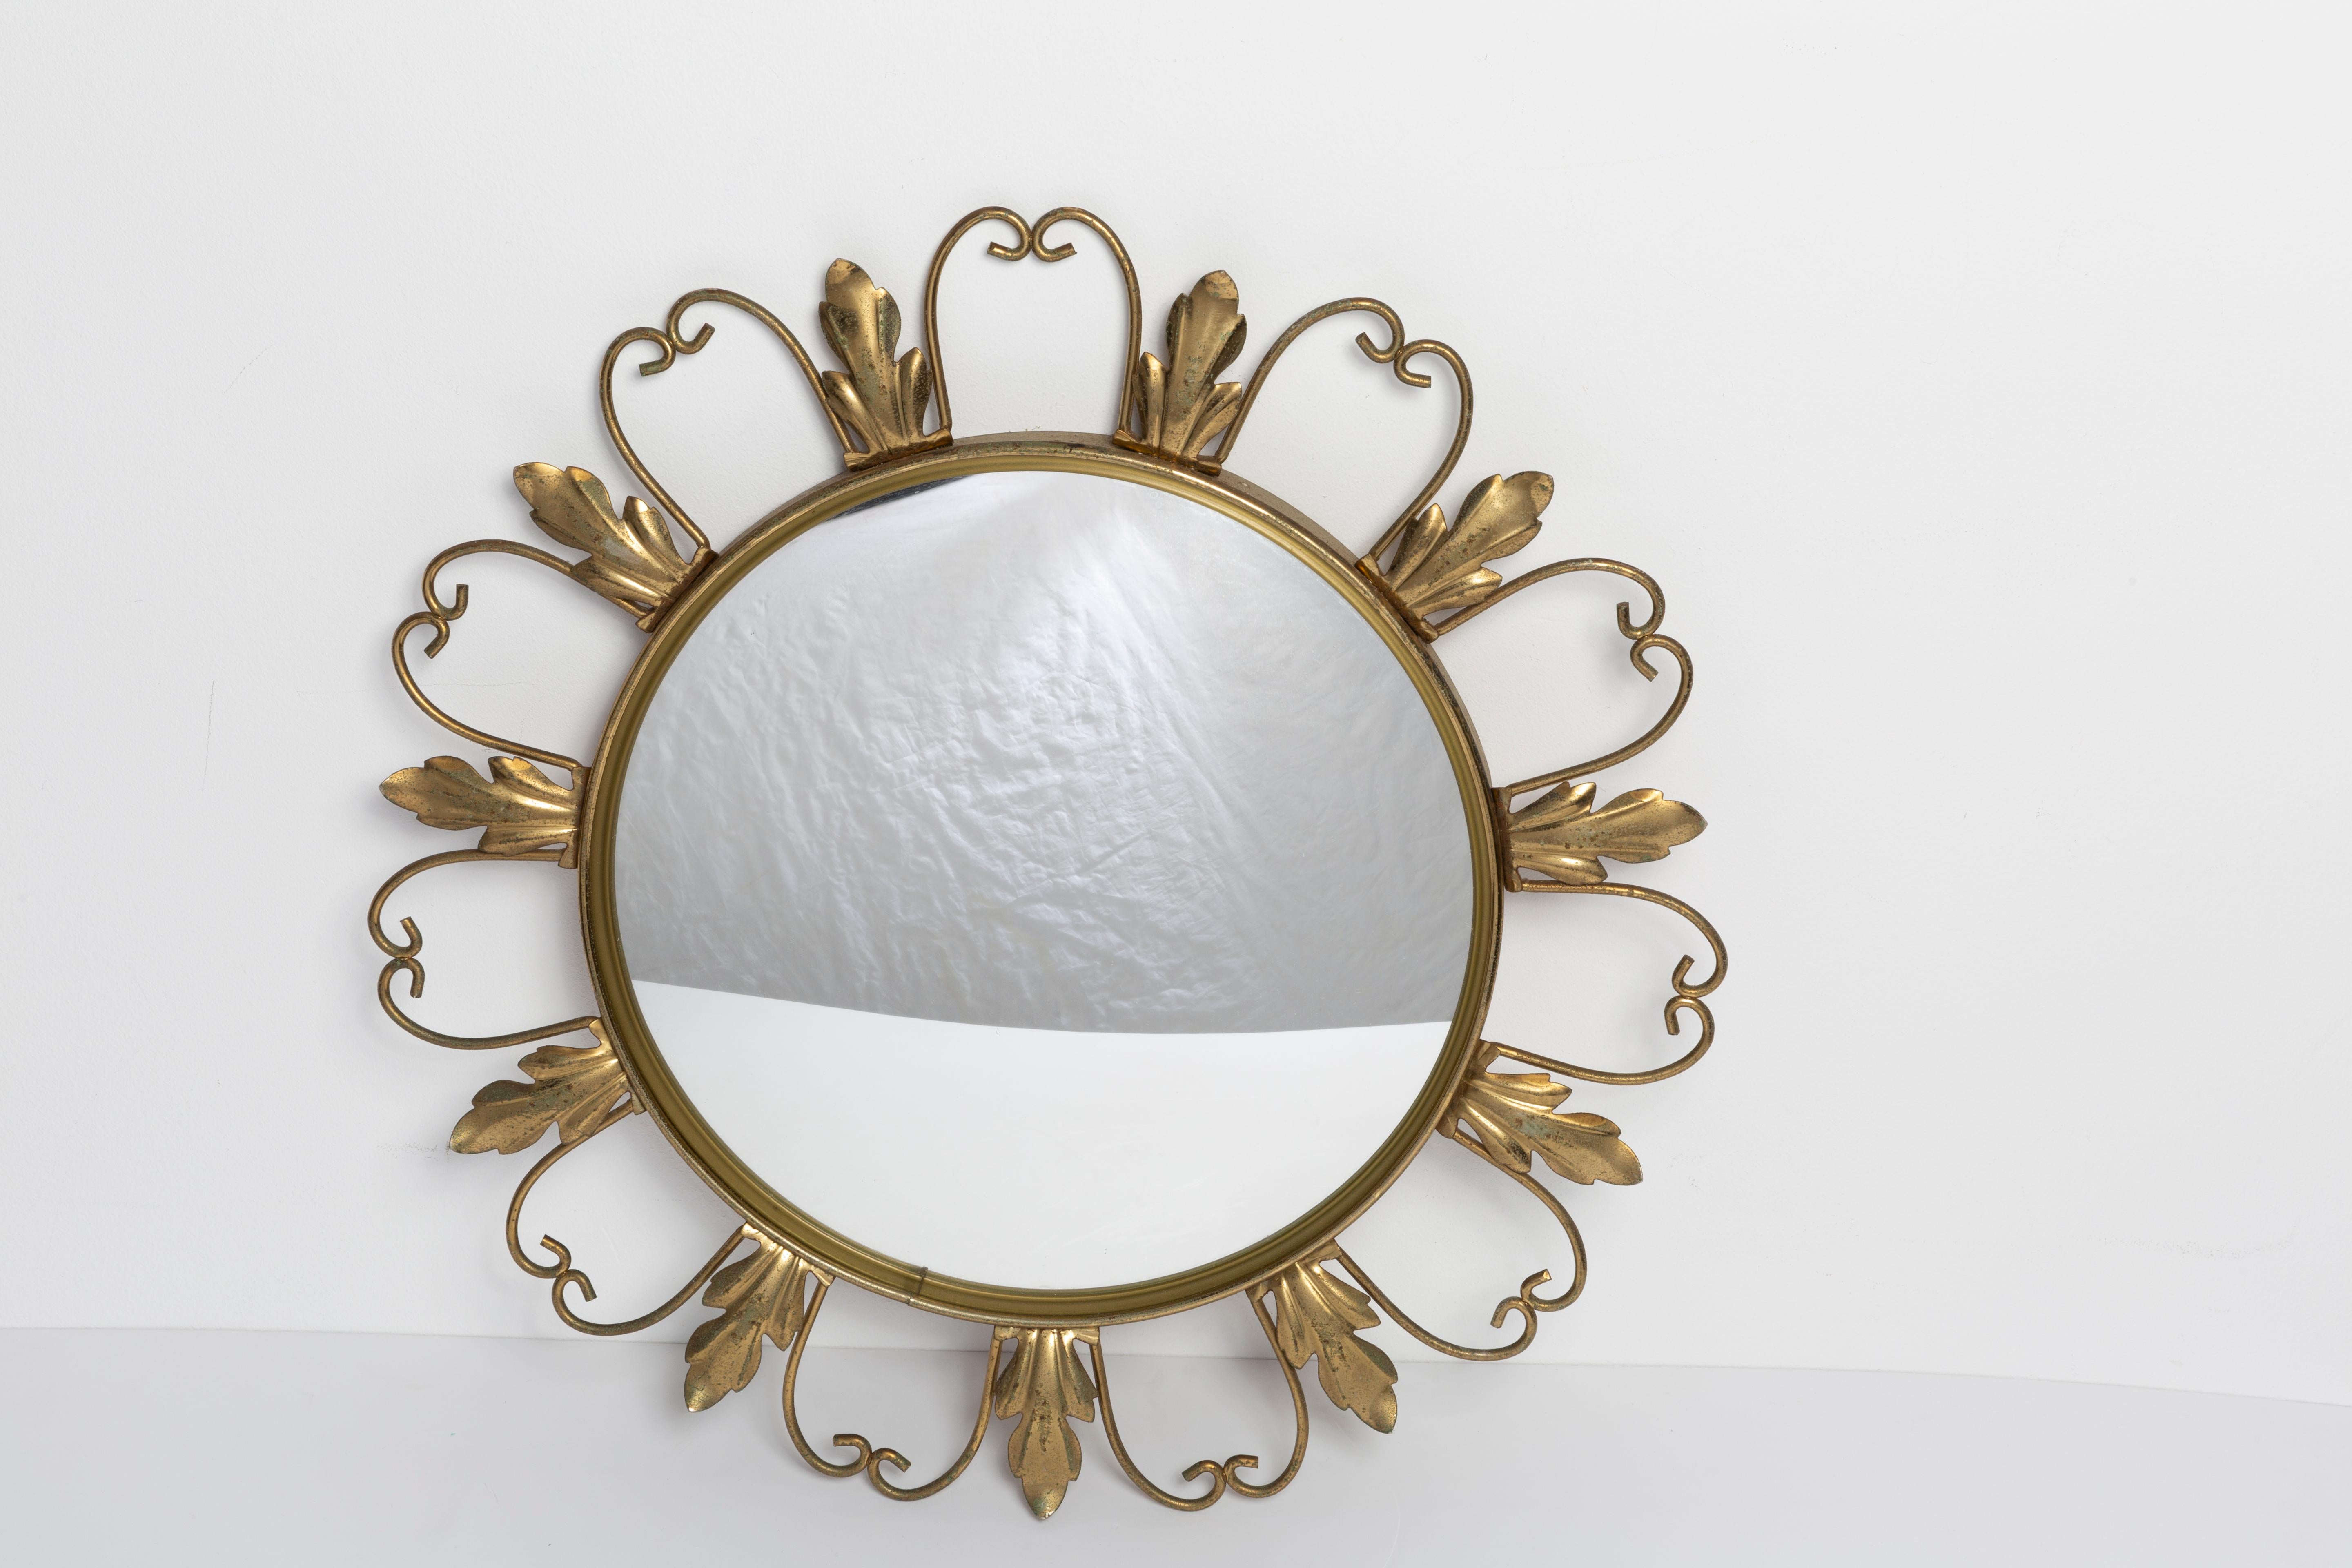 A mirror in a golden decorative sun-shaped frame from Belgium. The frame is made of metal and wood. Very good condition. Beautiful piece for every interior! Signed 